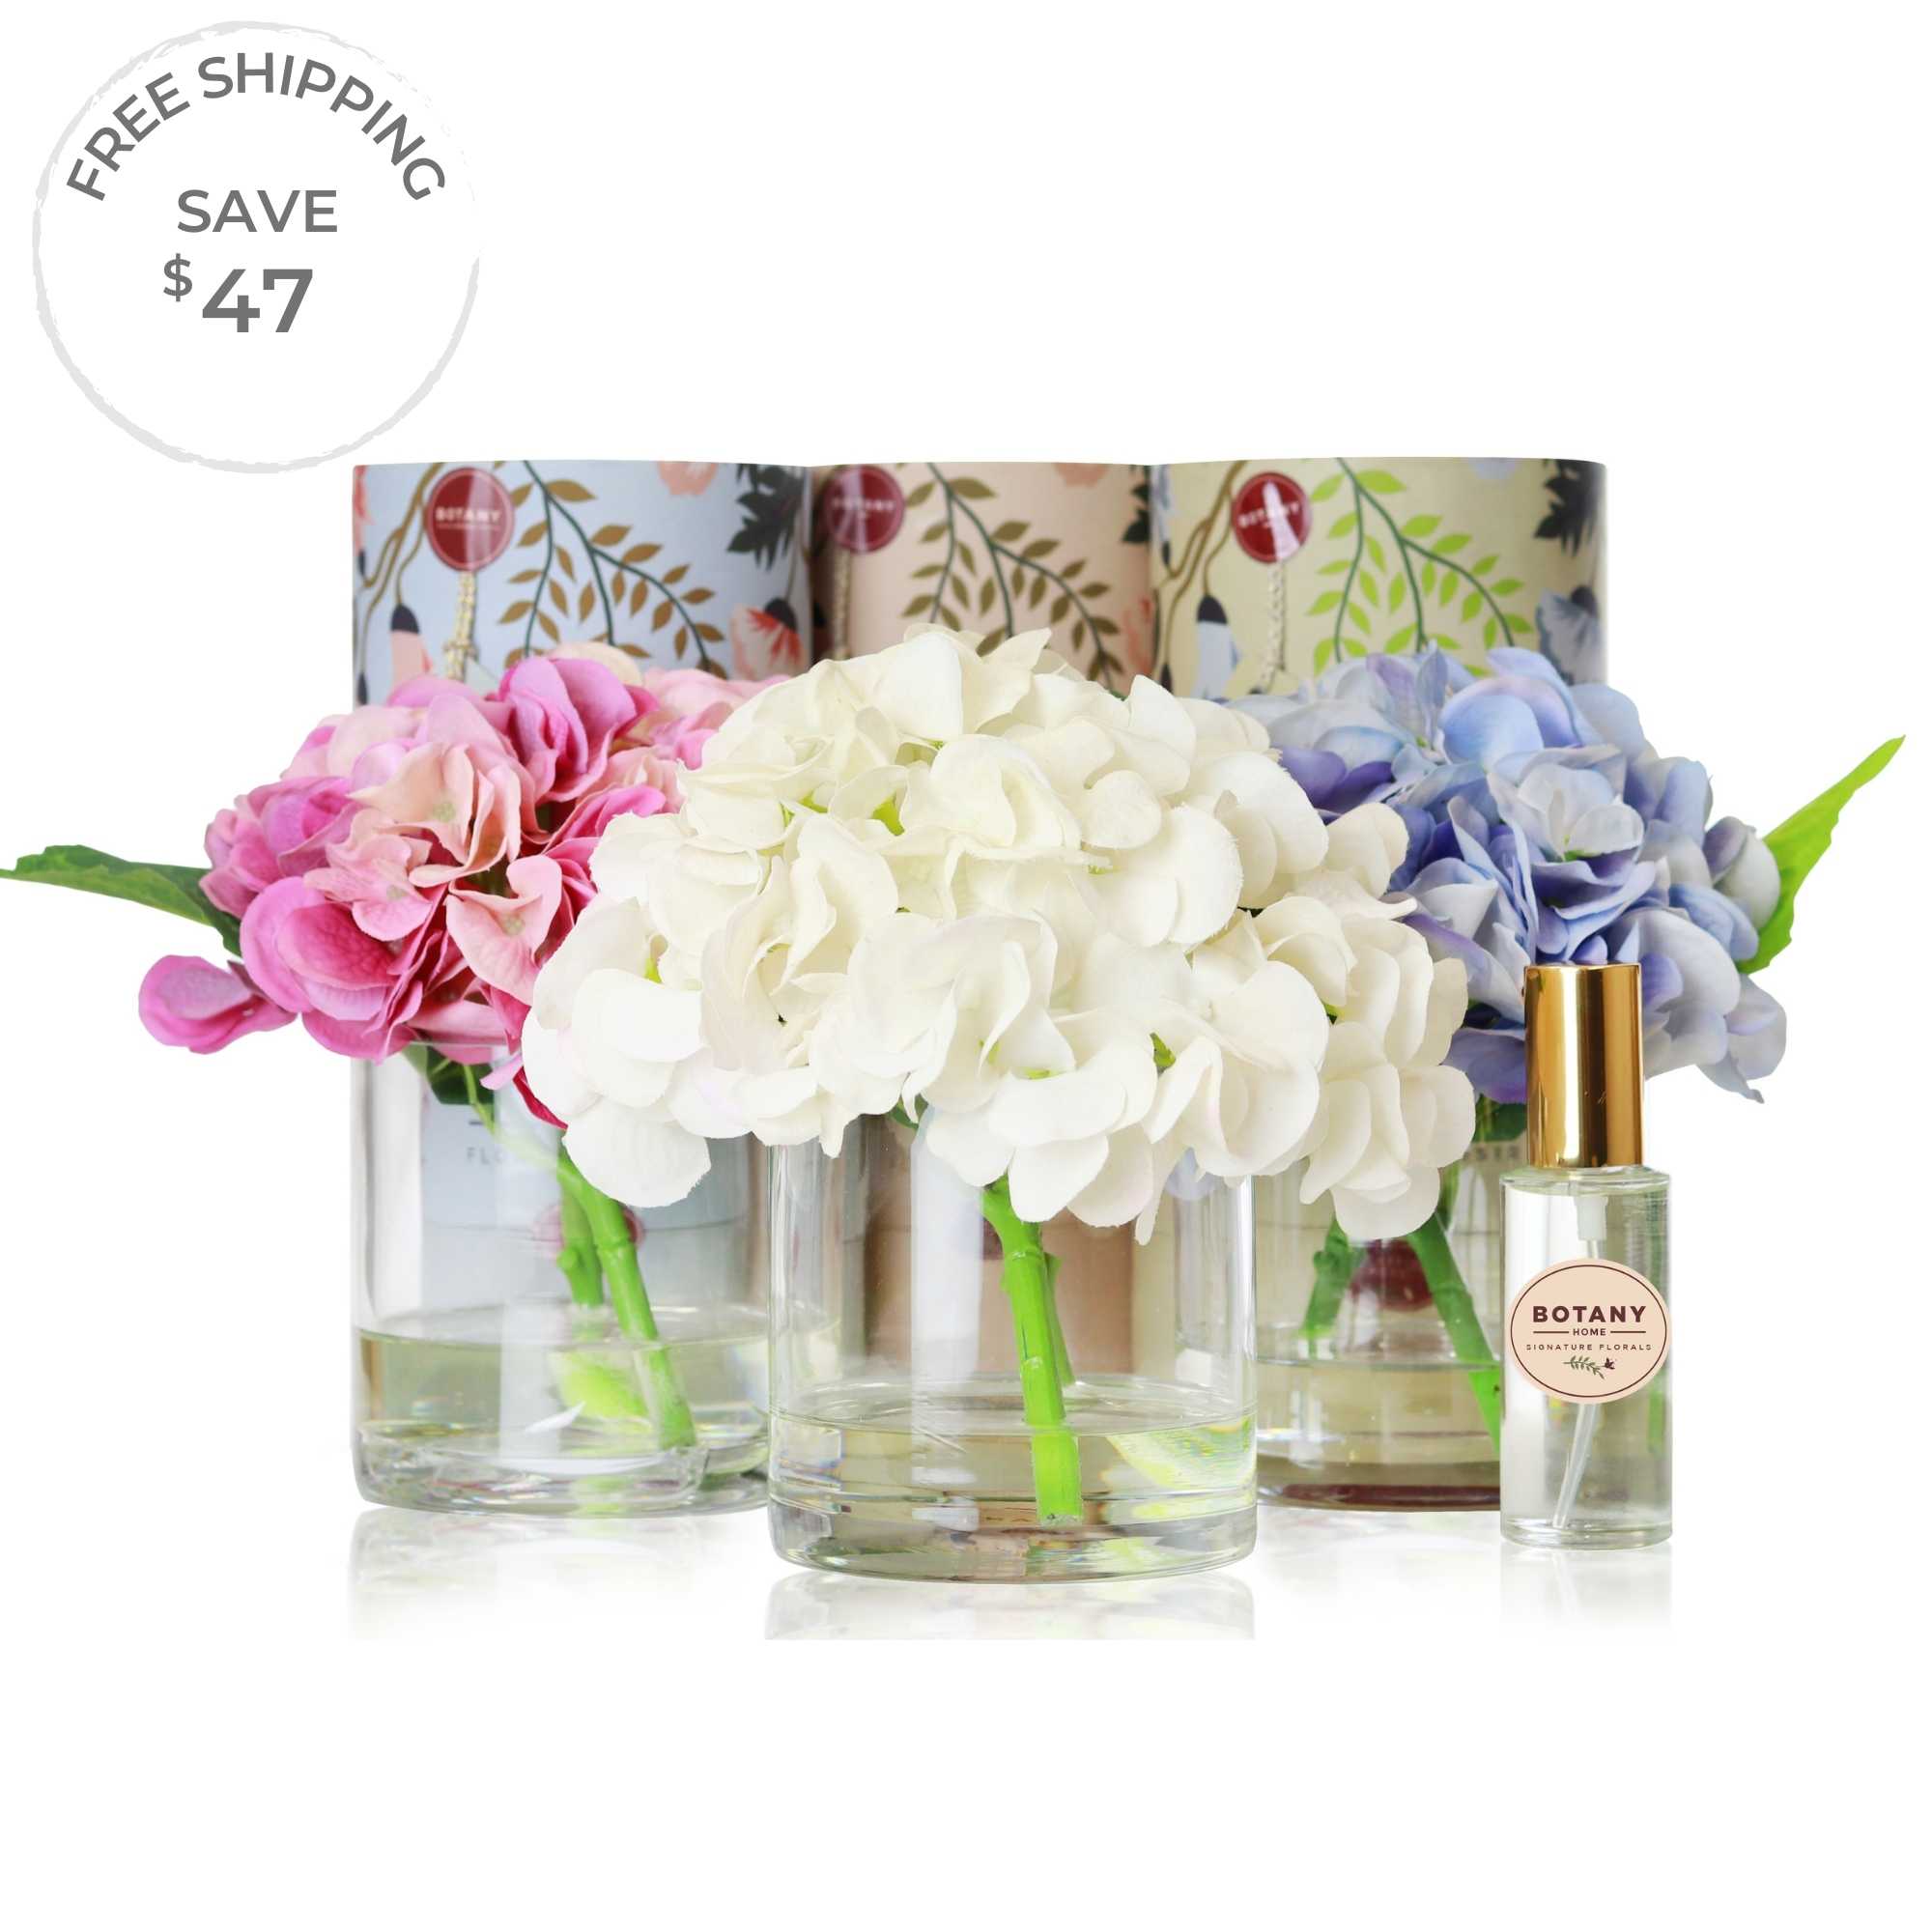 A set of 3 artificial hydrangea arrangements sold as a bundle paired with floral fragrances